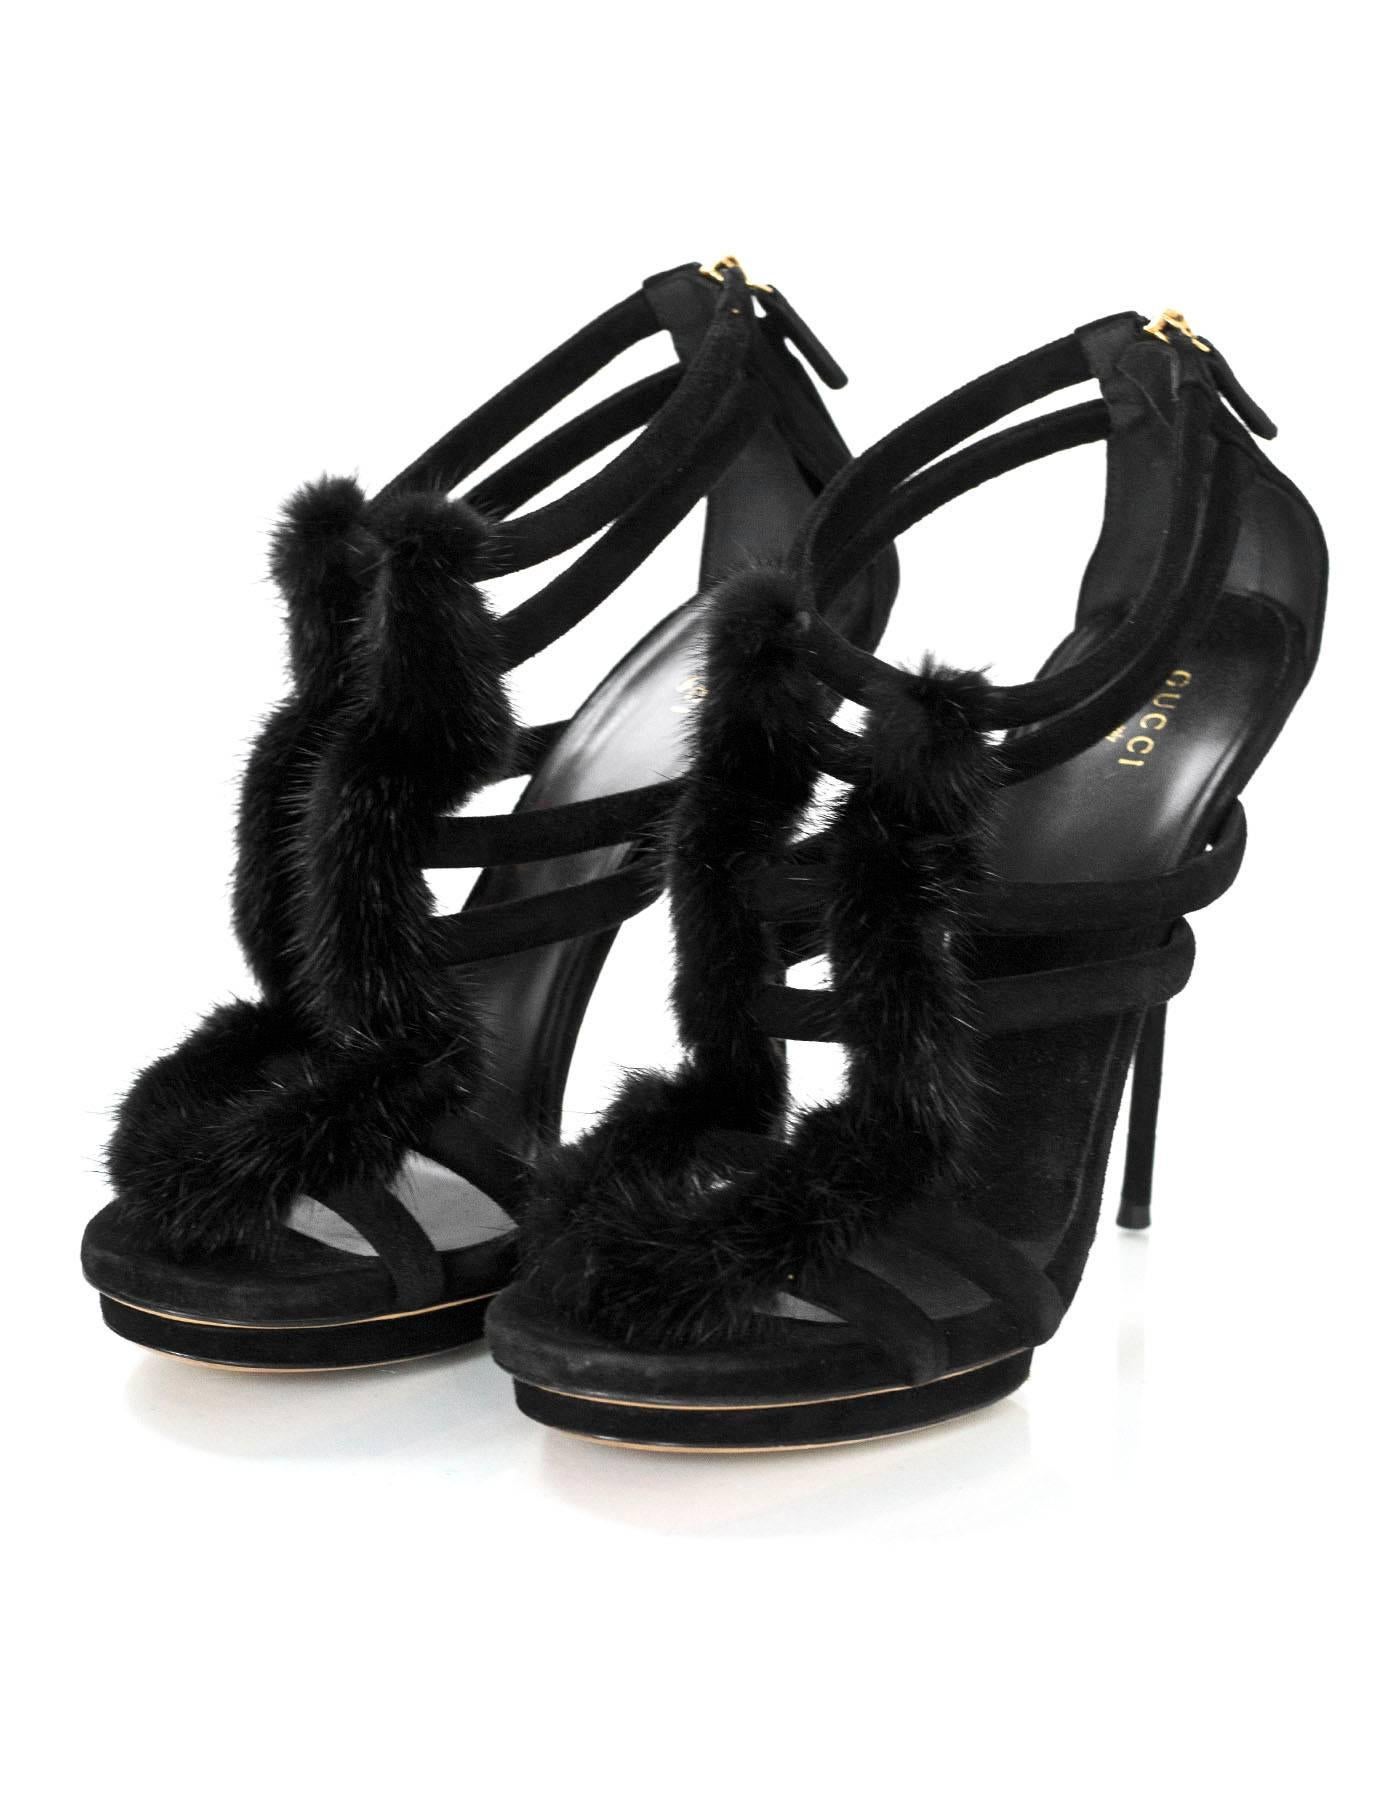 Gucci Black Suede & Mink Fur Strappy Sandals 
Features small suede wrapped platform

Made In: Italy
Color: Black 
Materials: Suede and mink fur
Closure/Opening: Back ankle zip up
Sole Stamp: Gucci Made in Italy 40 1/2
Overall Condition: Excellent